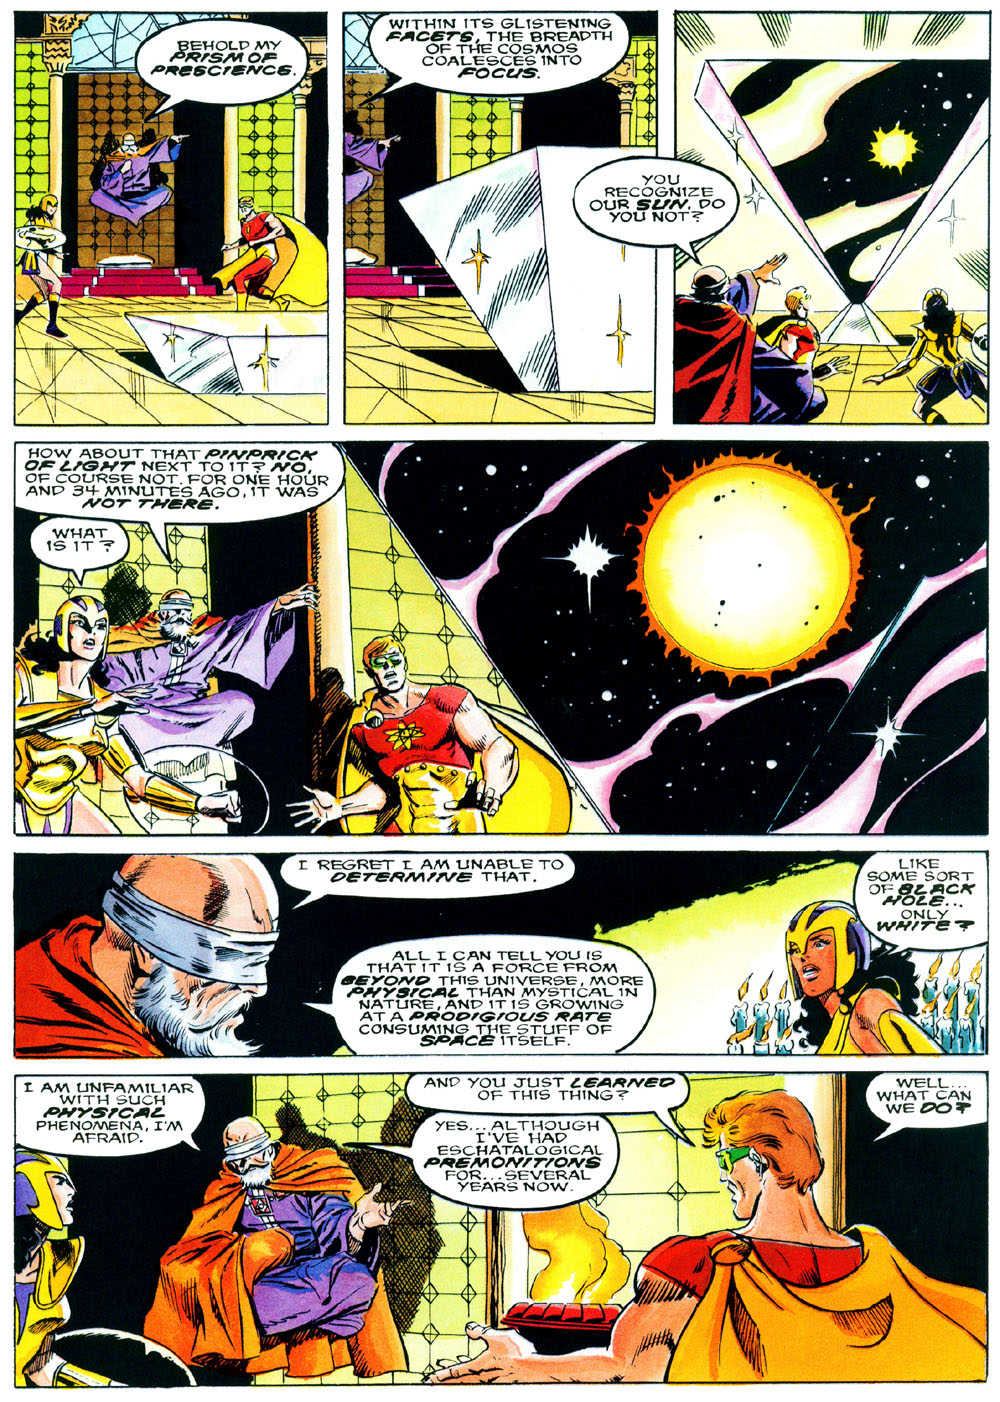 Read online Marvel Graphic Novel comic -  Issue #55 - Squadron Supreme - Death of a Universe - 26